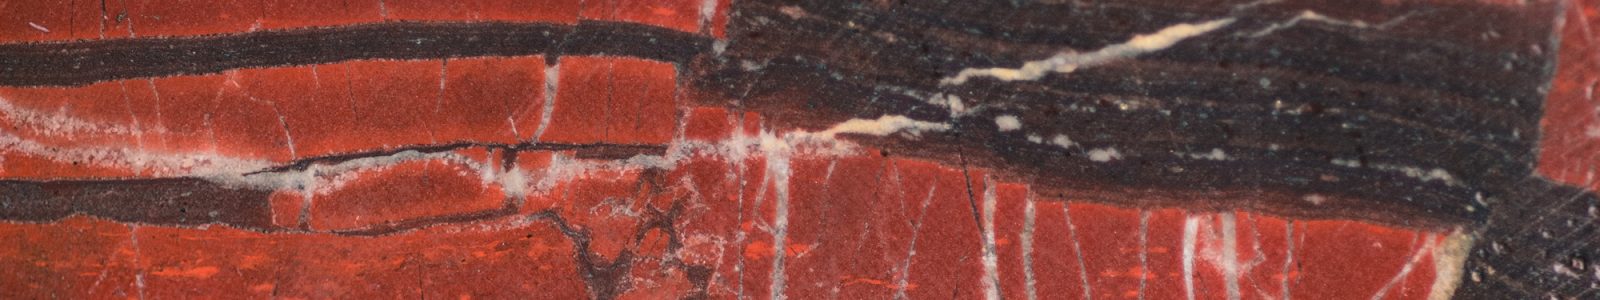 Rock sample from the Barberton core showing a closeup of orange and dark red striations